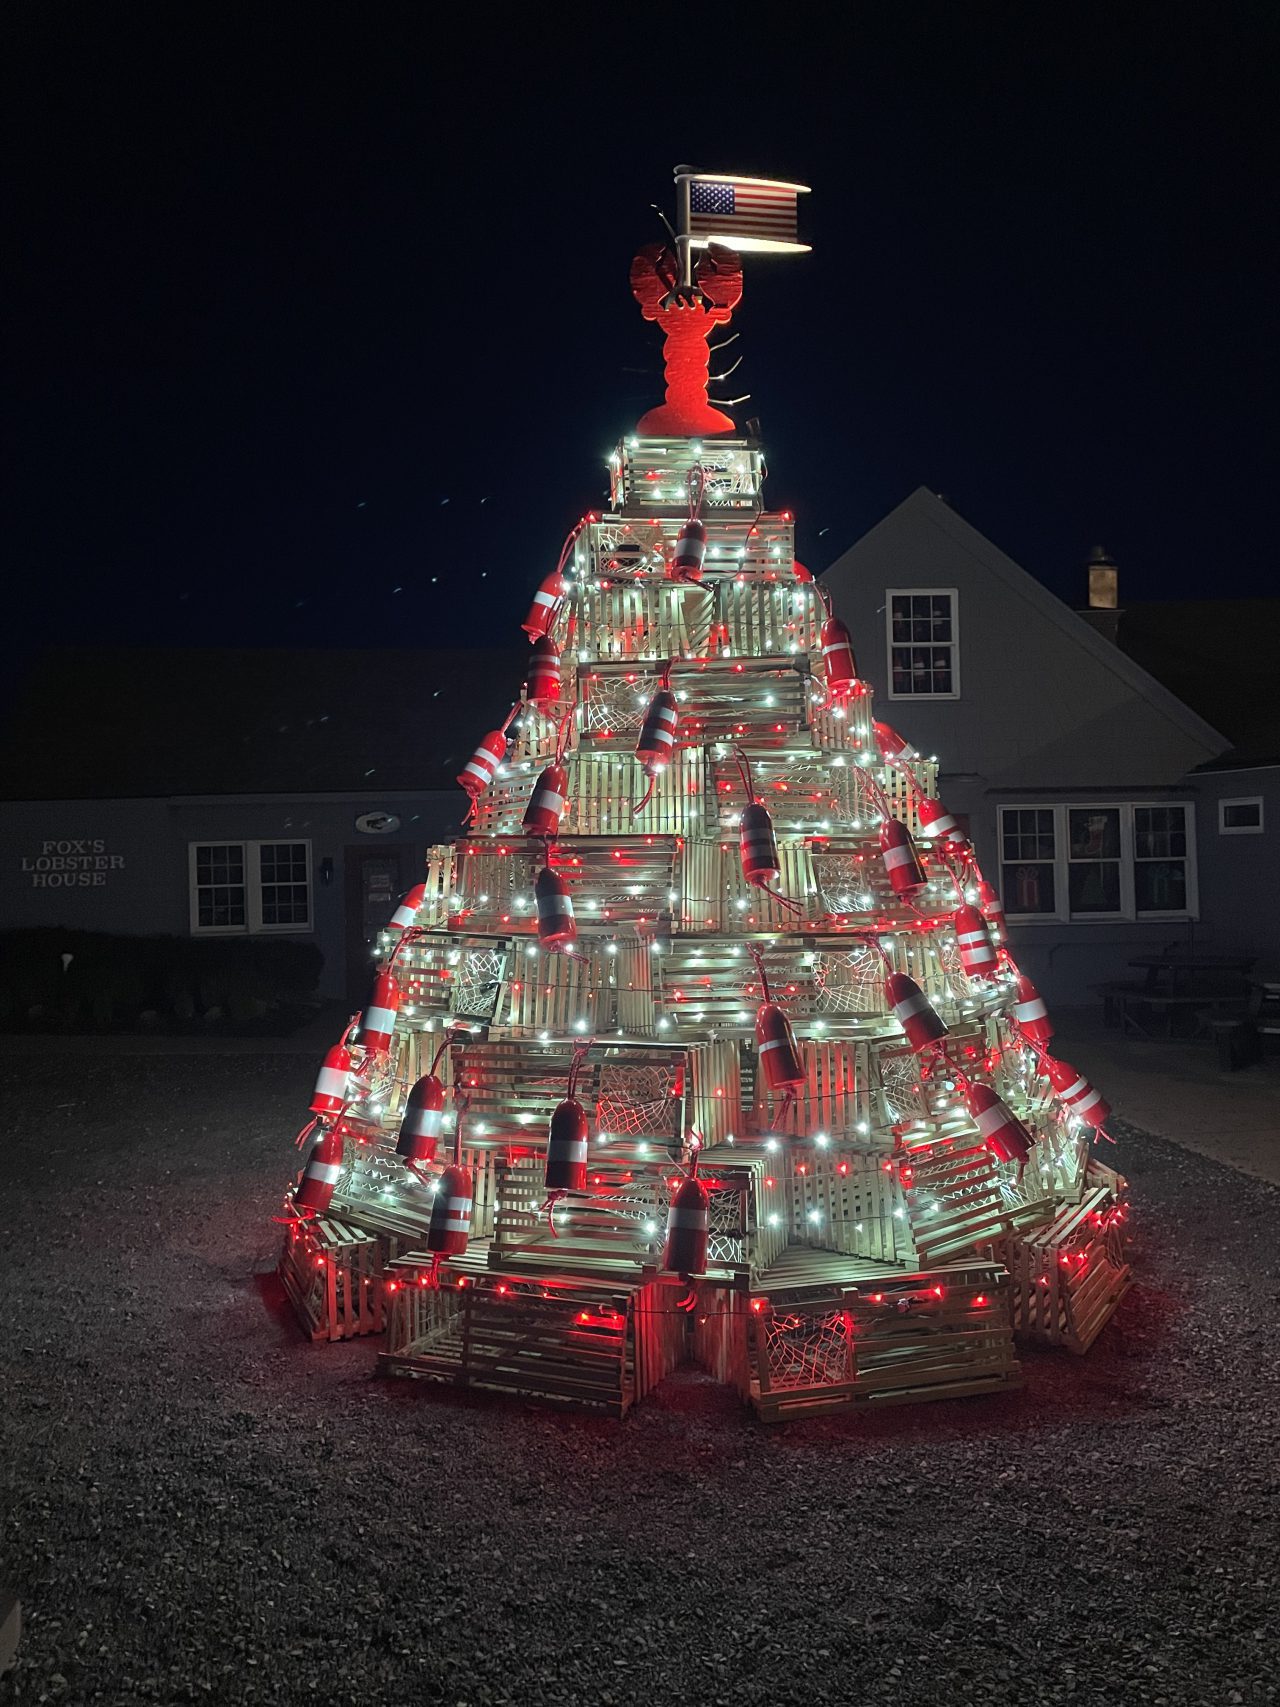 Lobster Trap Christmas Tree at Fox's Lobster House in York Beach, Maine